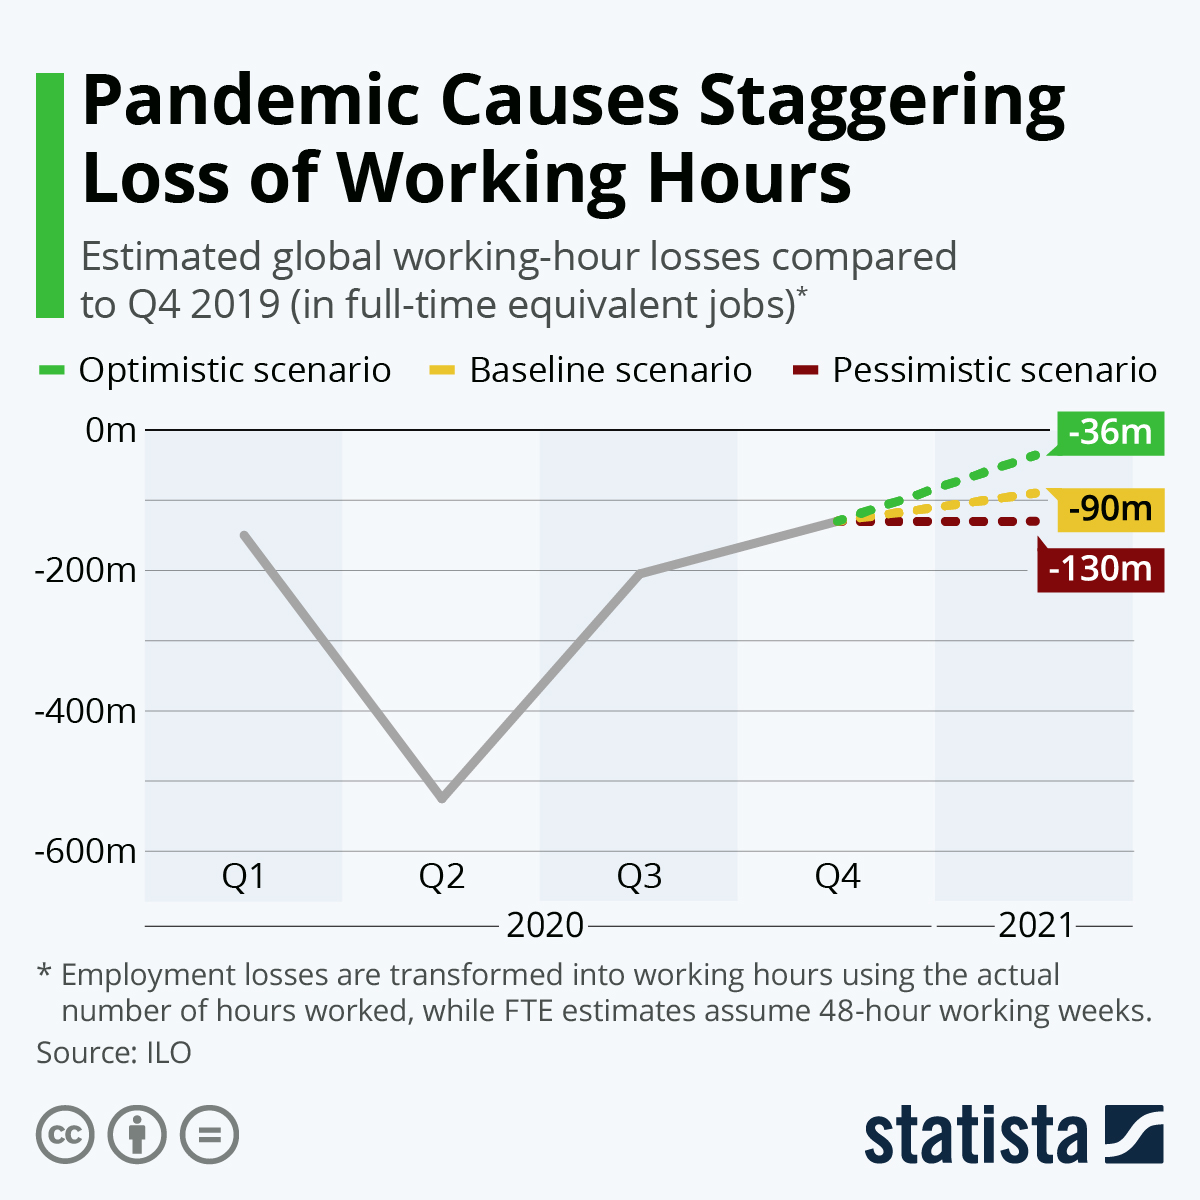 Pandemic Causes Staggering Loss of Working Hours